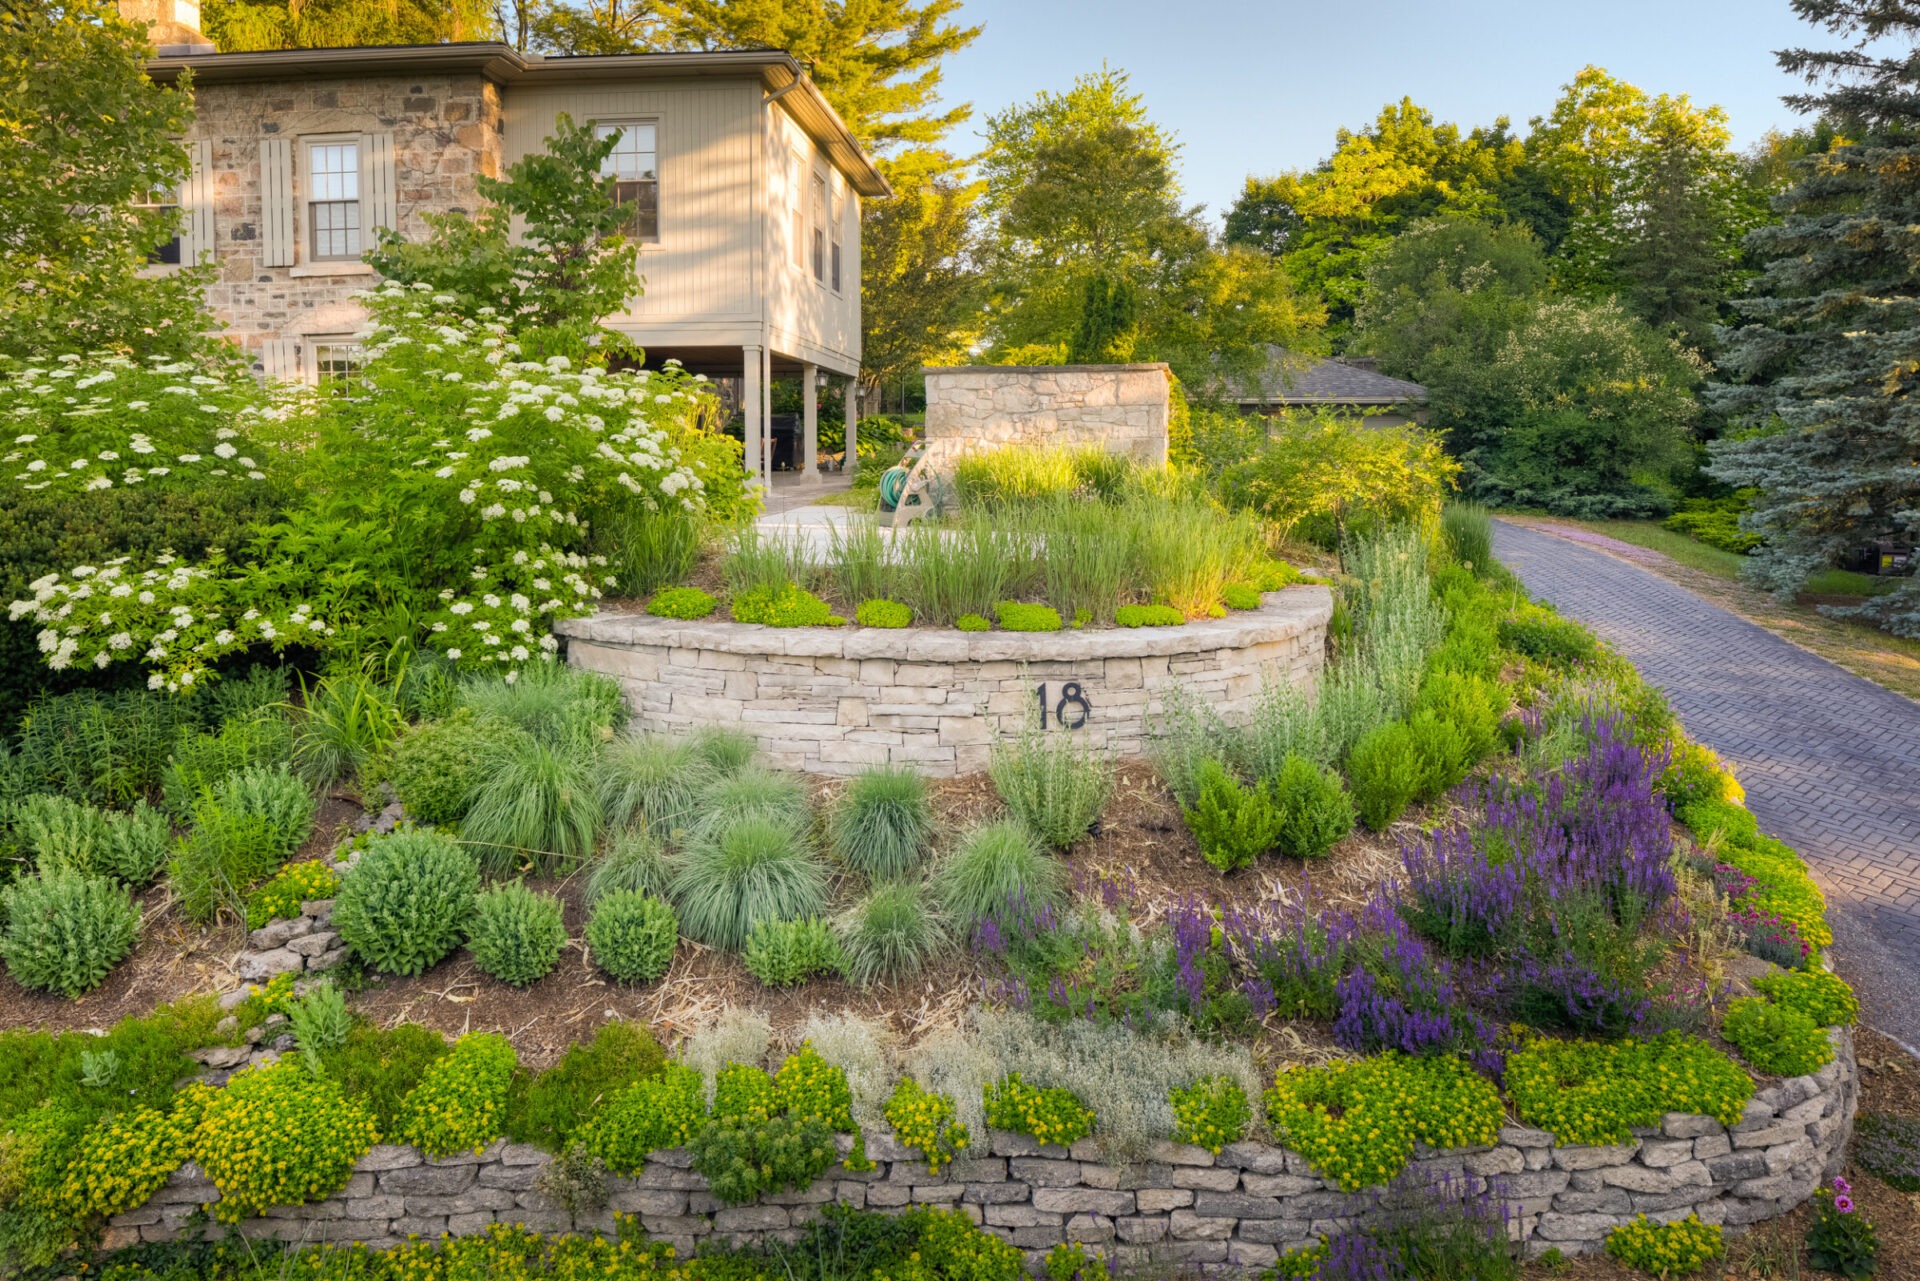 This image showcases a landscaped garden, with tiered stone walls, flourishing greenery, and vibrant flowers, in front of a traditional stone-faced house.